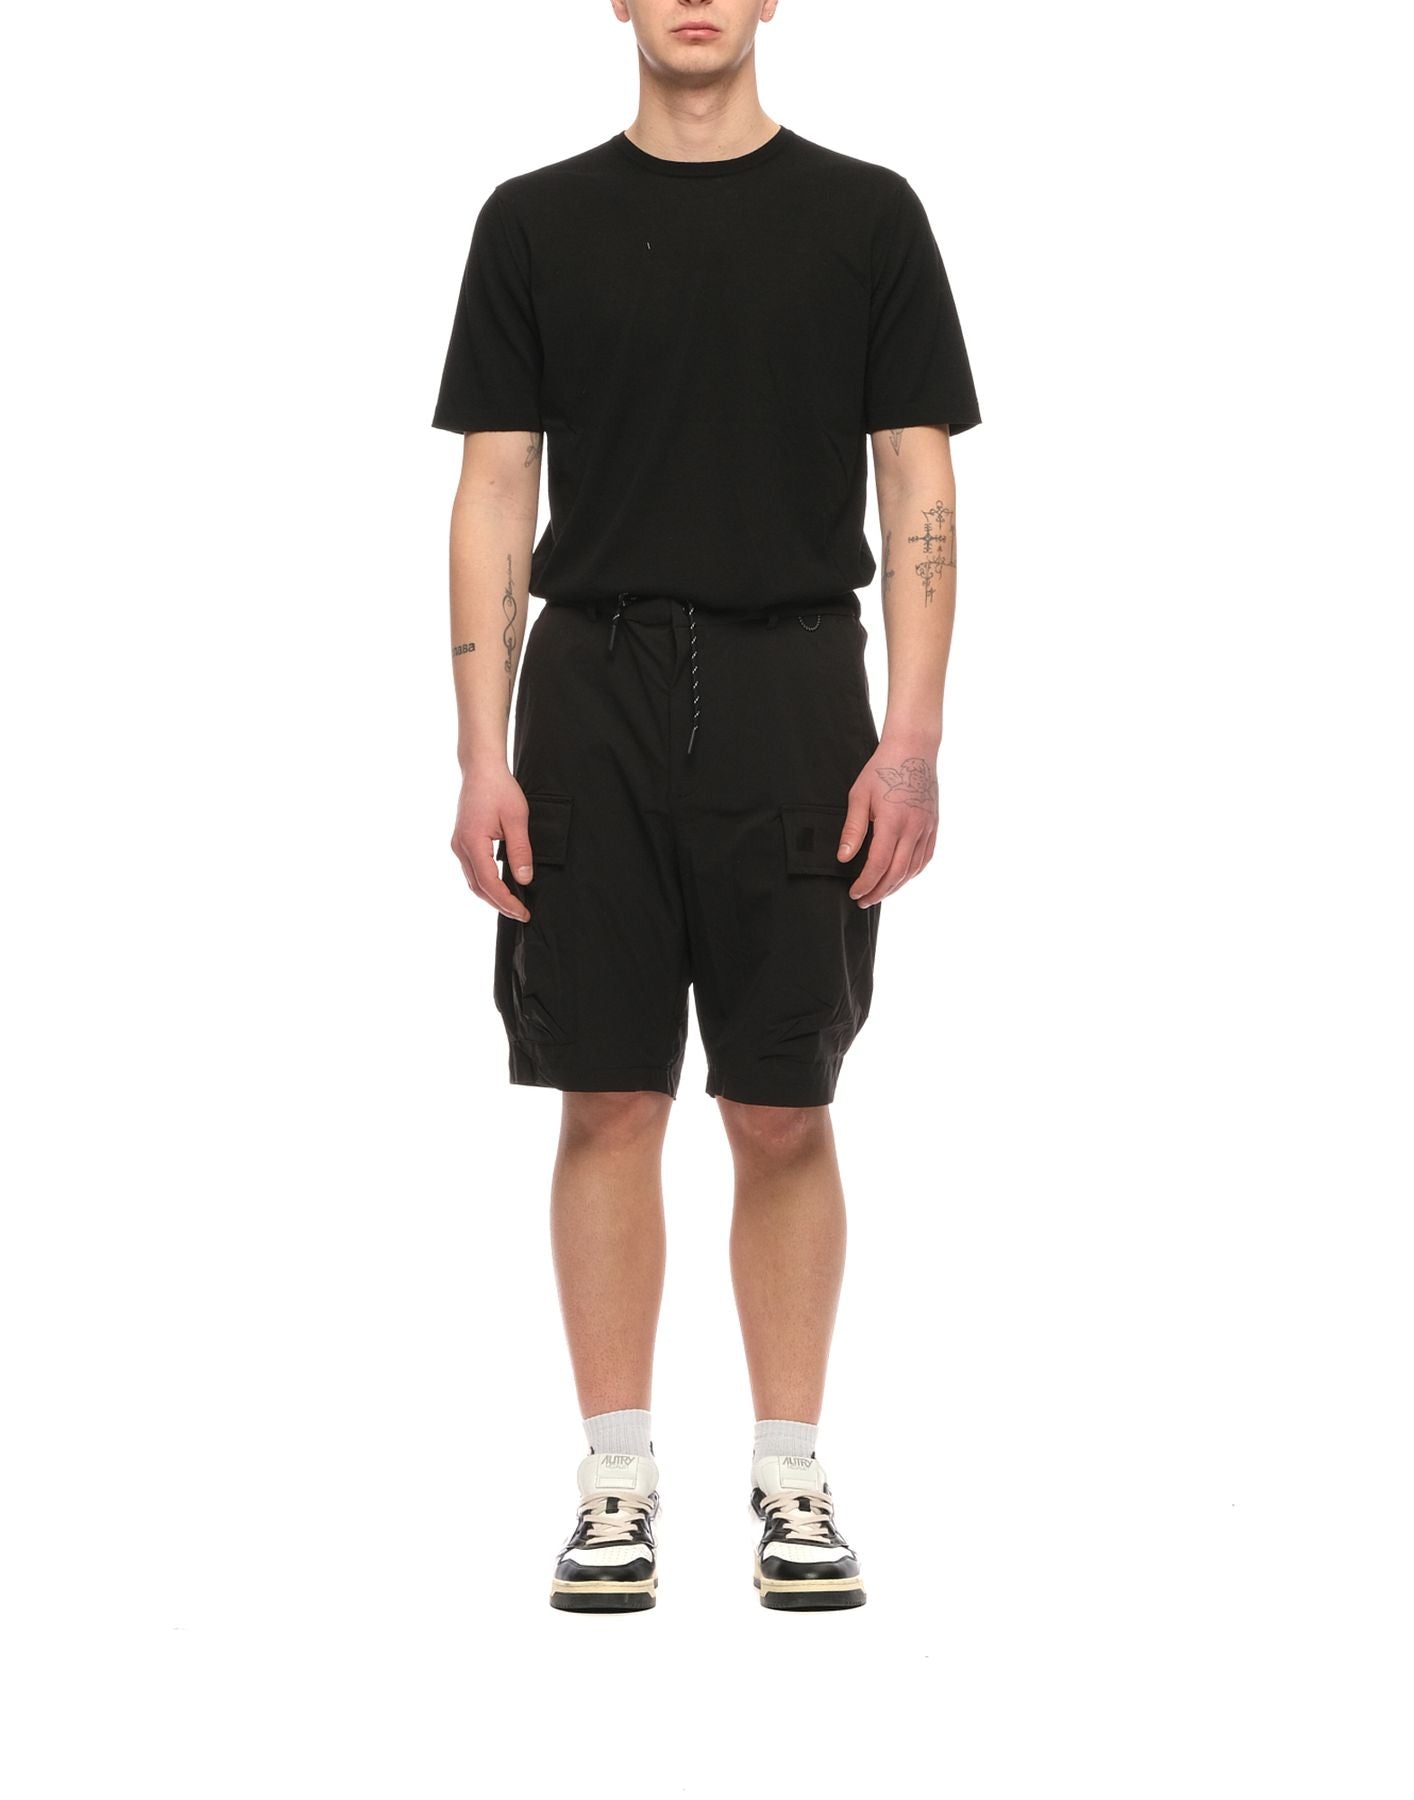 Shorts man EOTM216AE42 BLACK OUTHERE